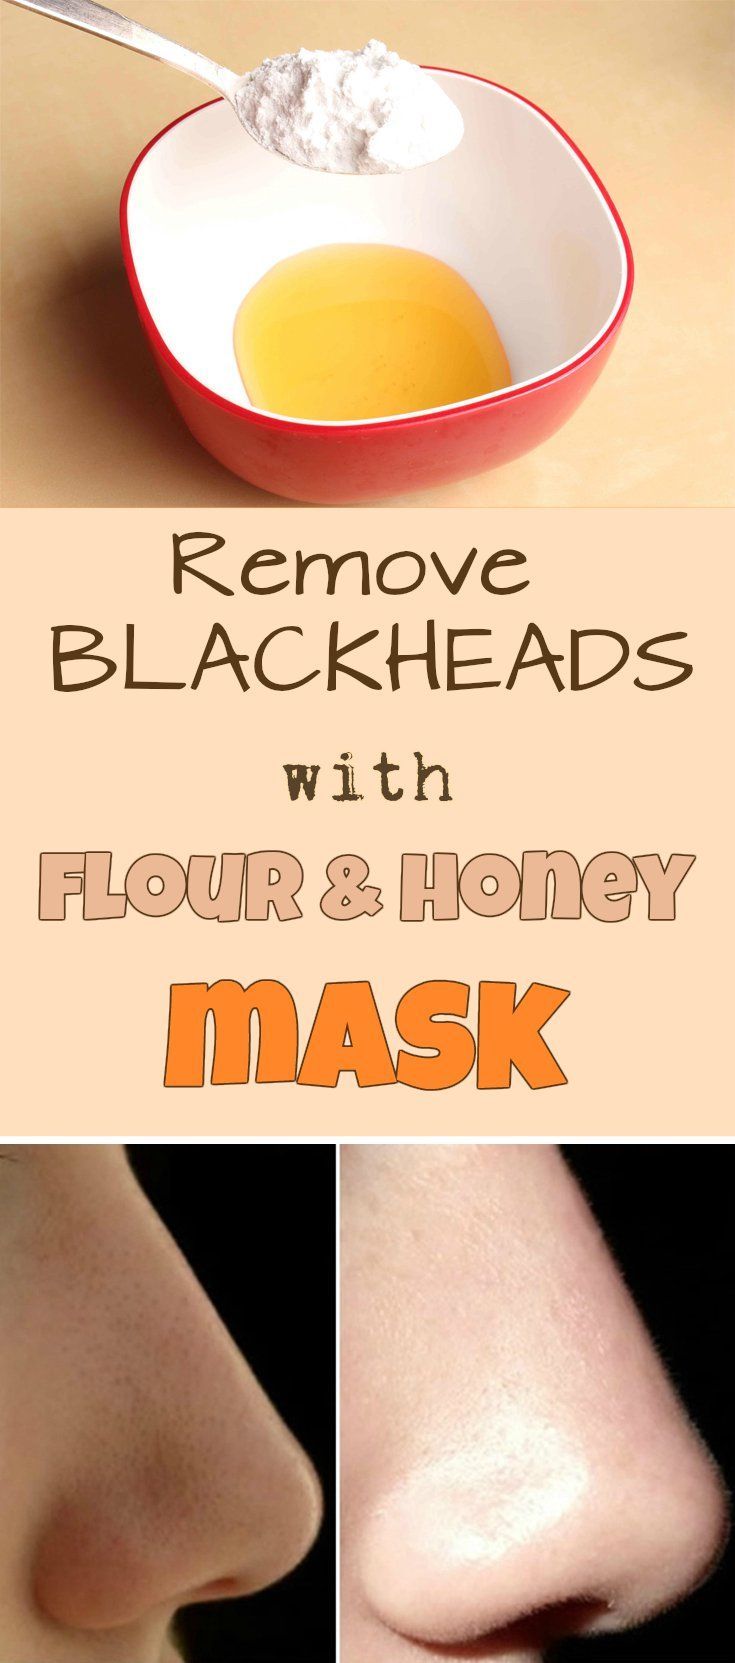 7 DIY Blackhead Remedies To Try At Home - 7 DIY Blackhead Remedies To Try At Home -   15 diy Face Mask black heads ideas